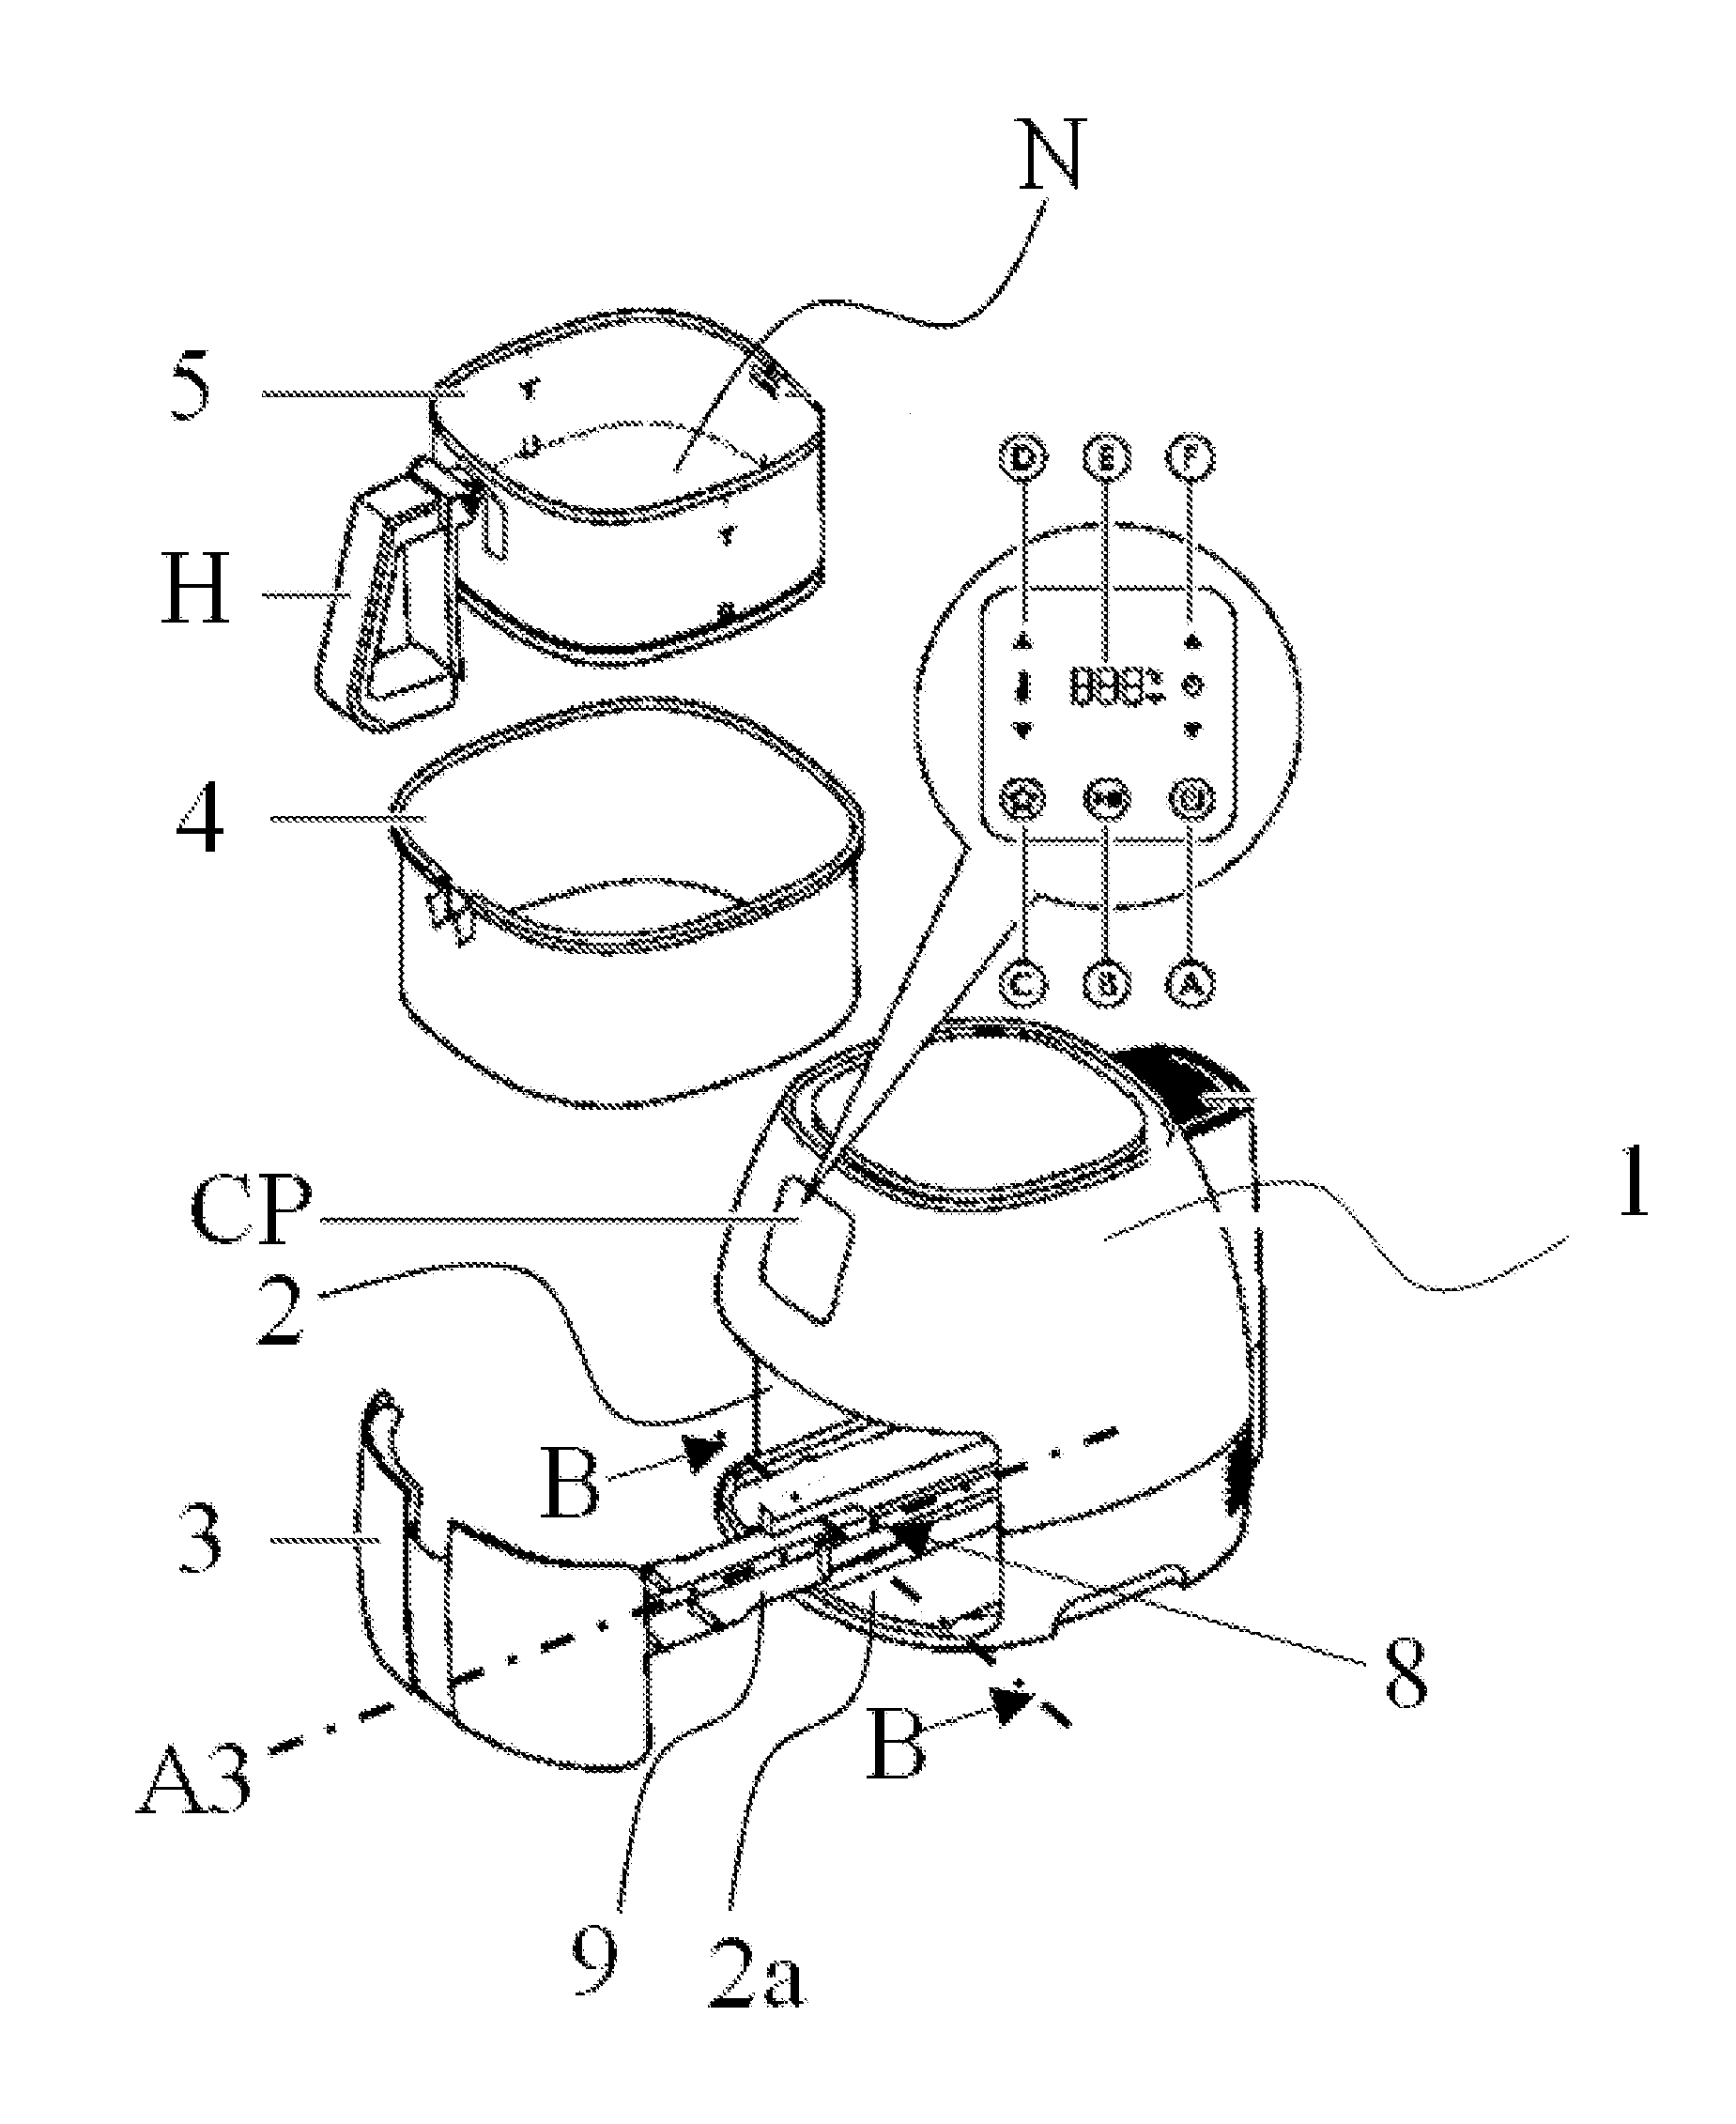 Apparatus for preparing food having a drawer with a sliding mechanism